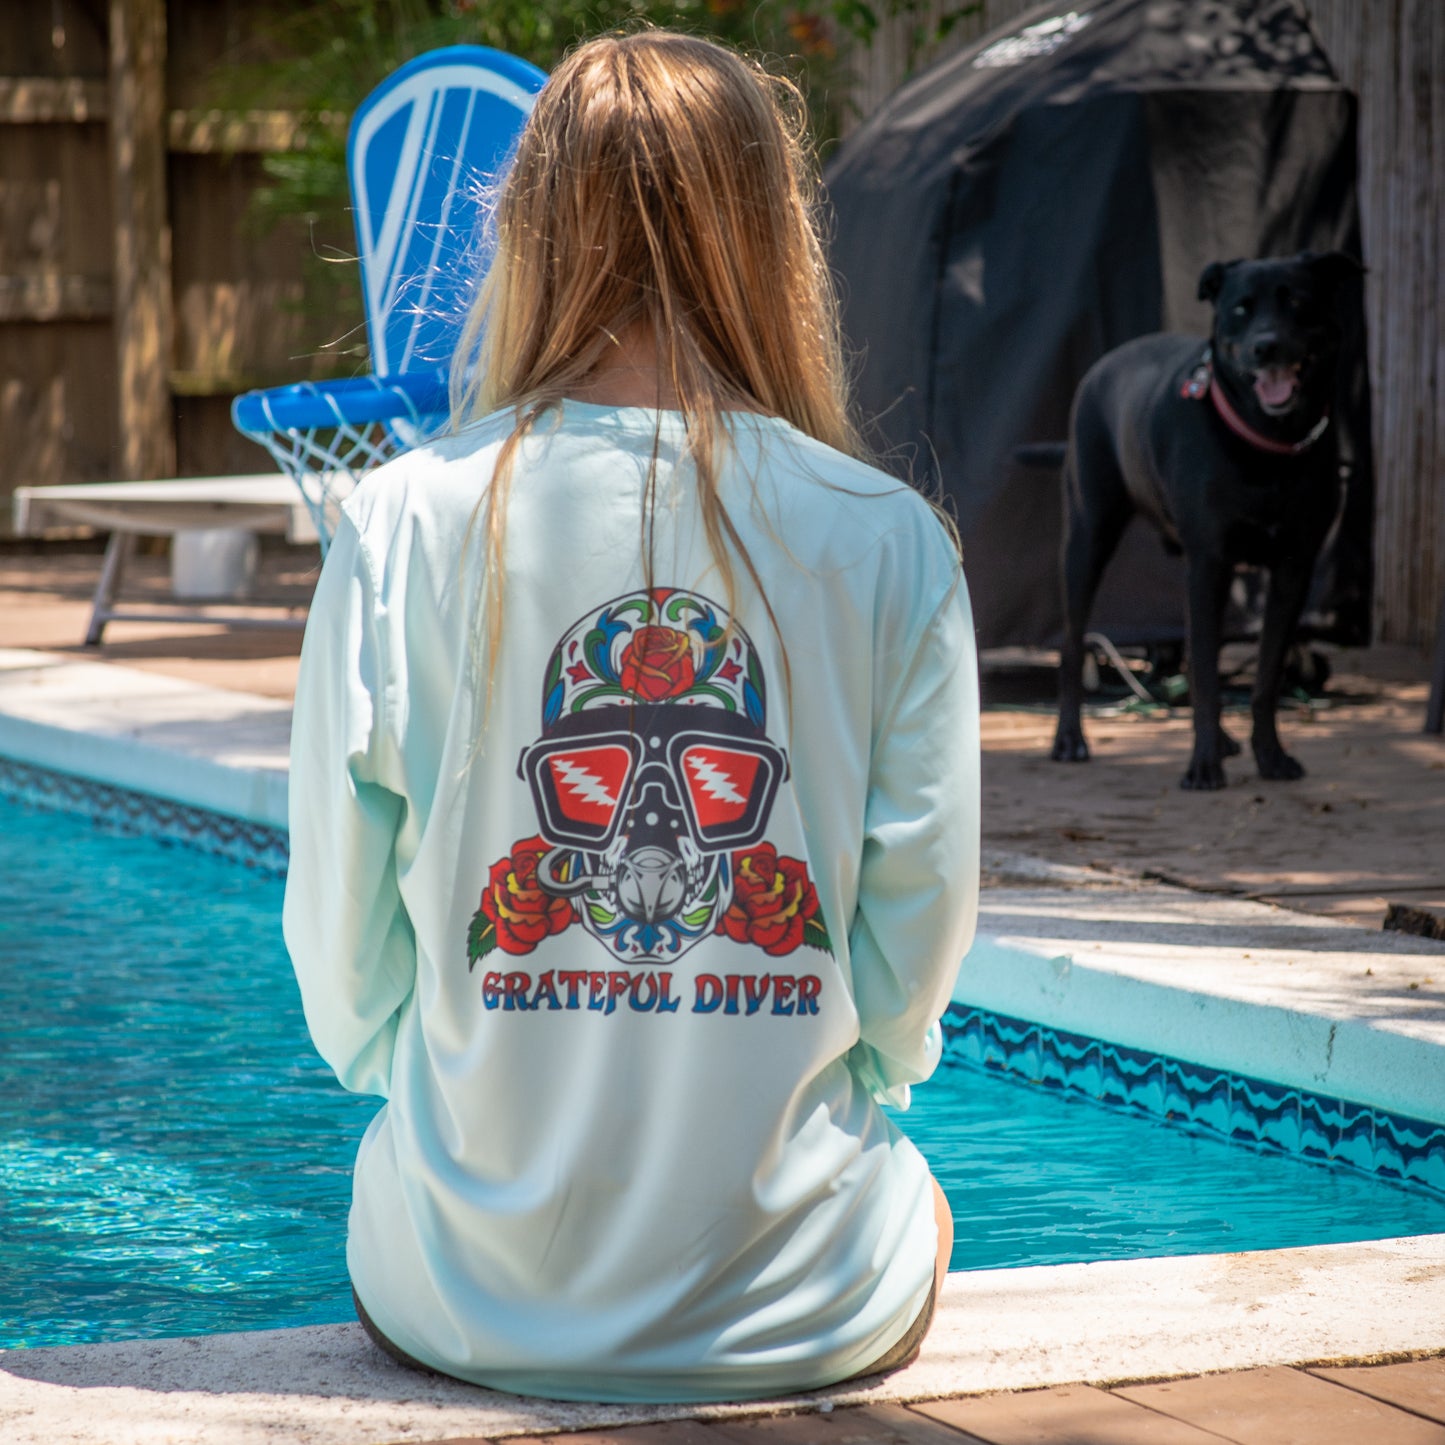 Grateful Diver Sugar Skull UV Shirt in arctic blue showing back on woman sitting by dog & pool